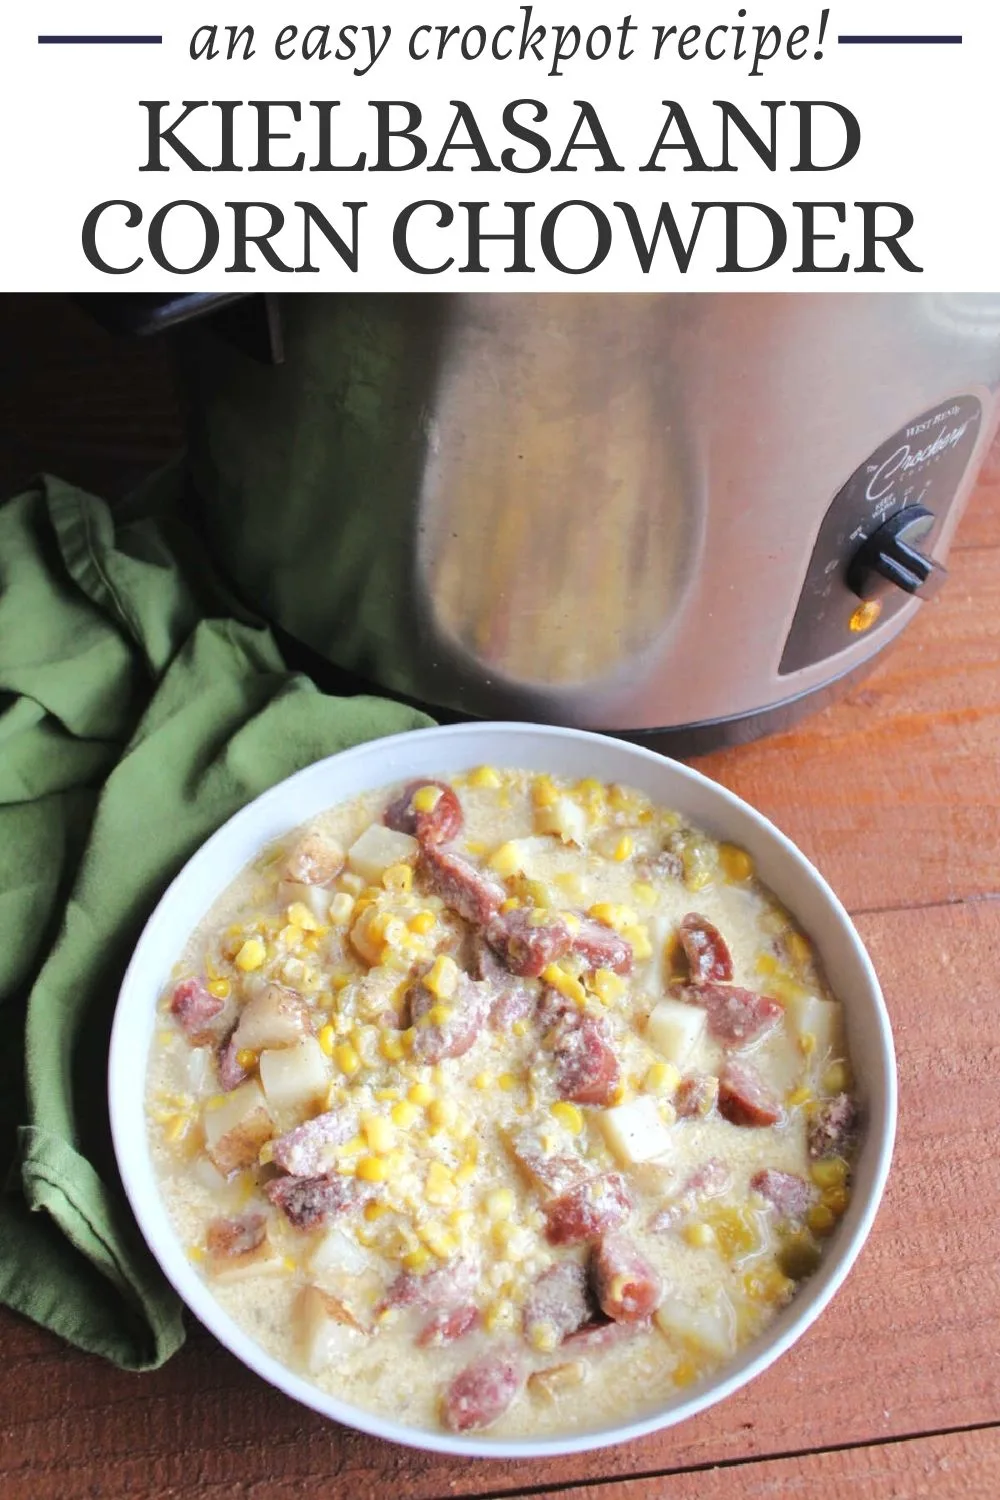 Slow cooker corn and kielbasa chowder is a filling and warming meal that takes very little effort to put together. It is creamy, filled with flavor and easy to make.